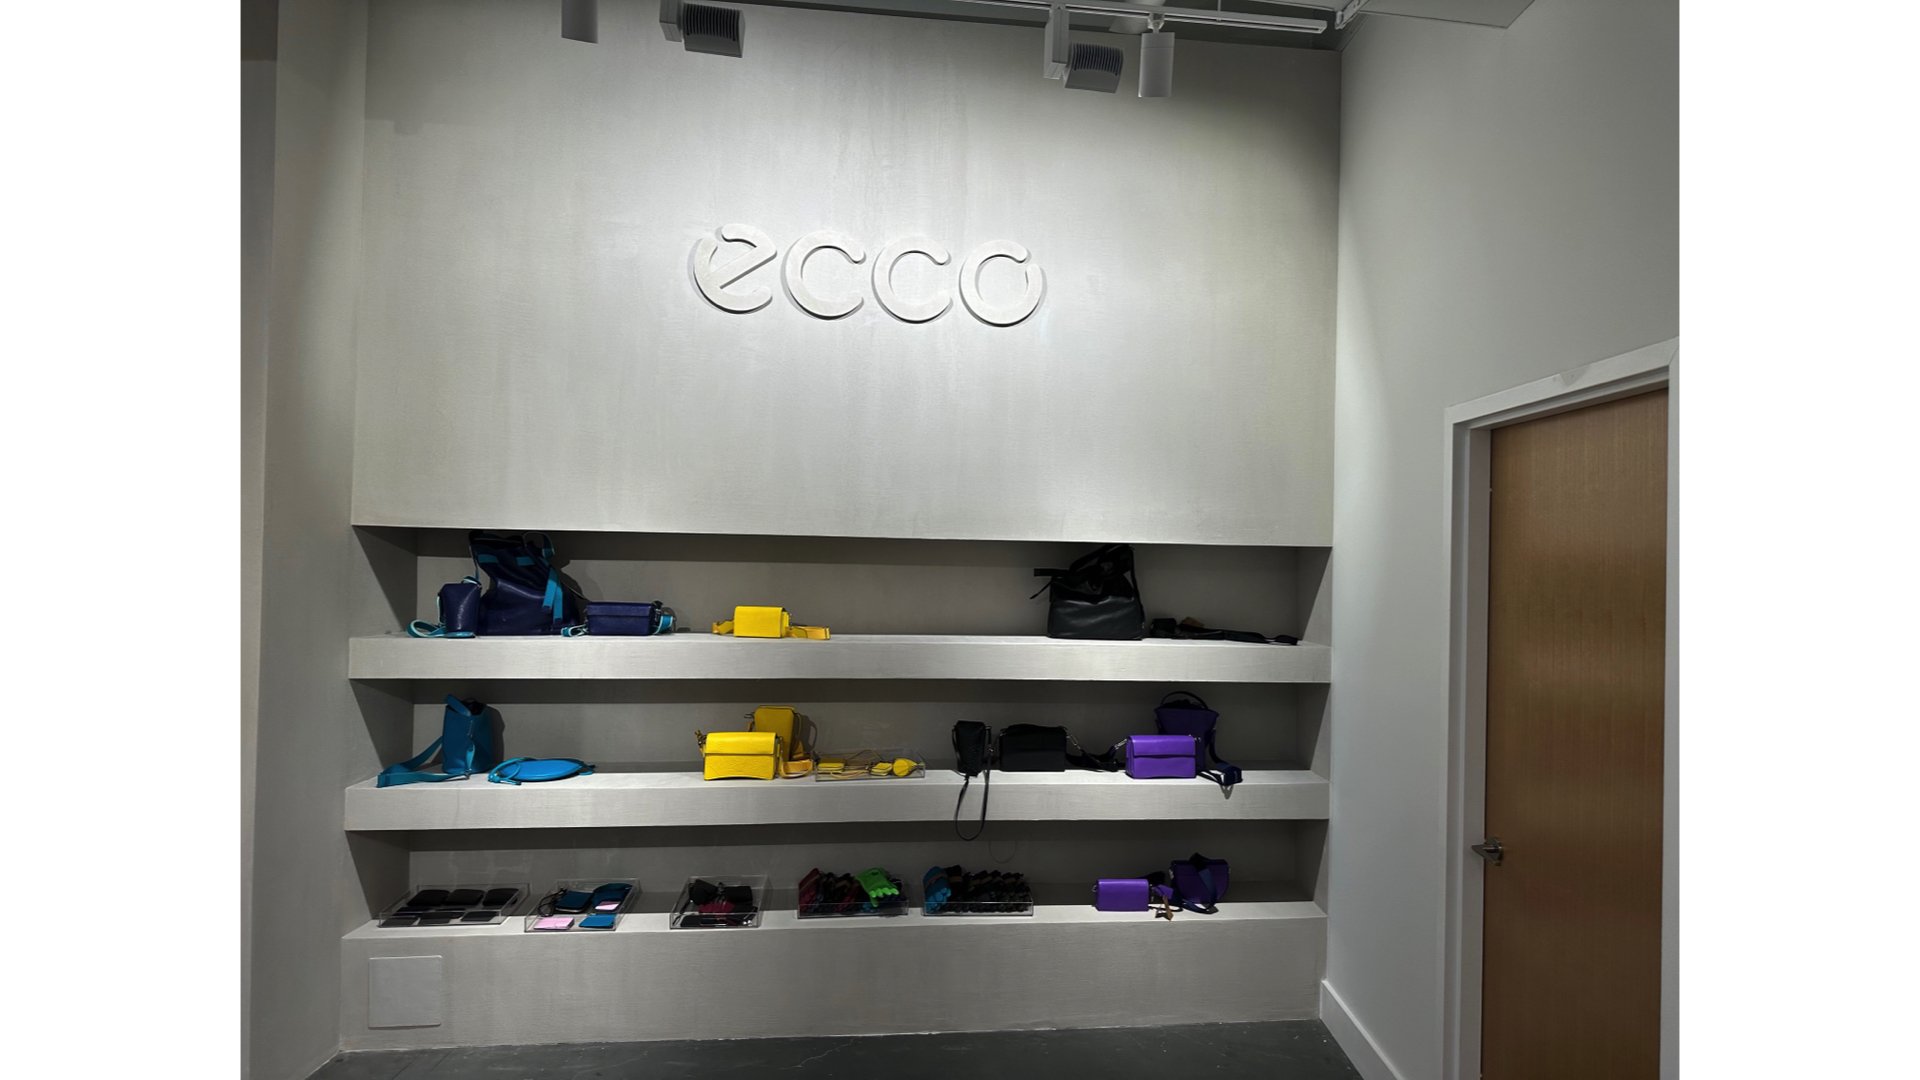 ecco sign and bags resize.jpg